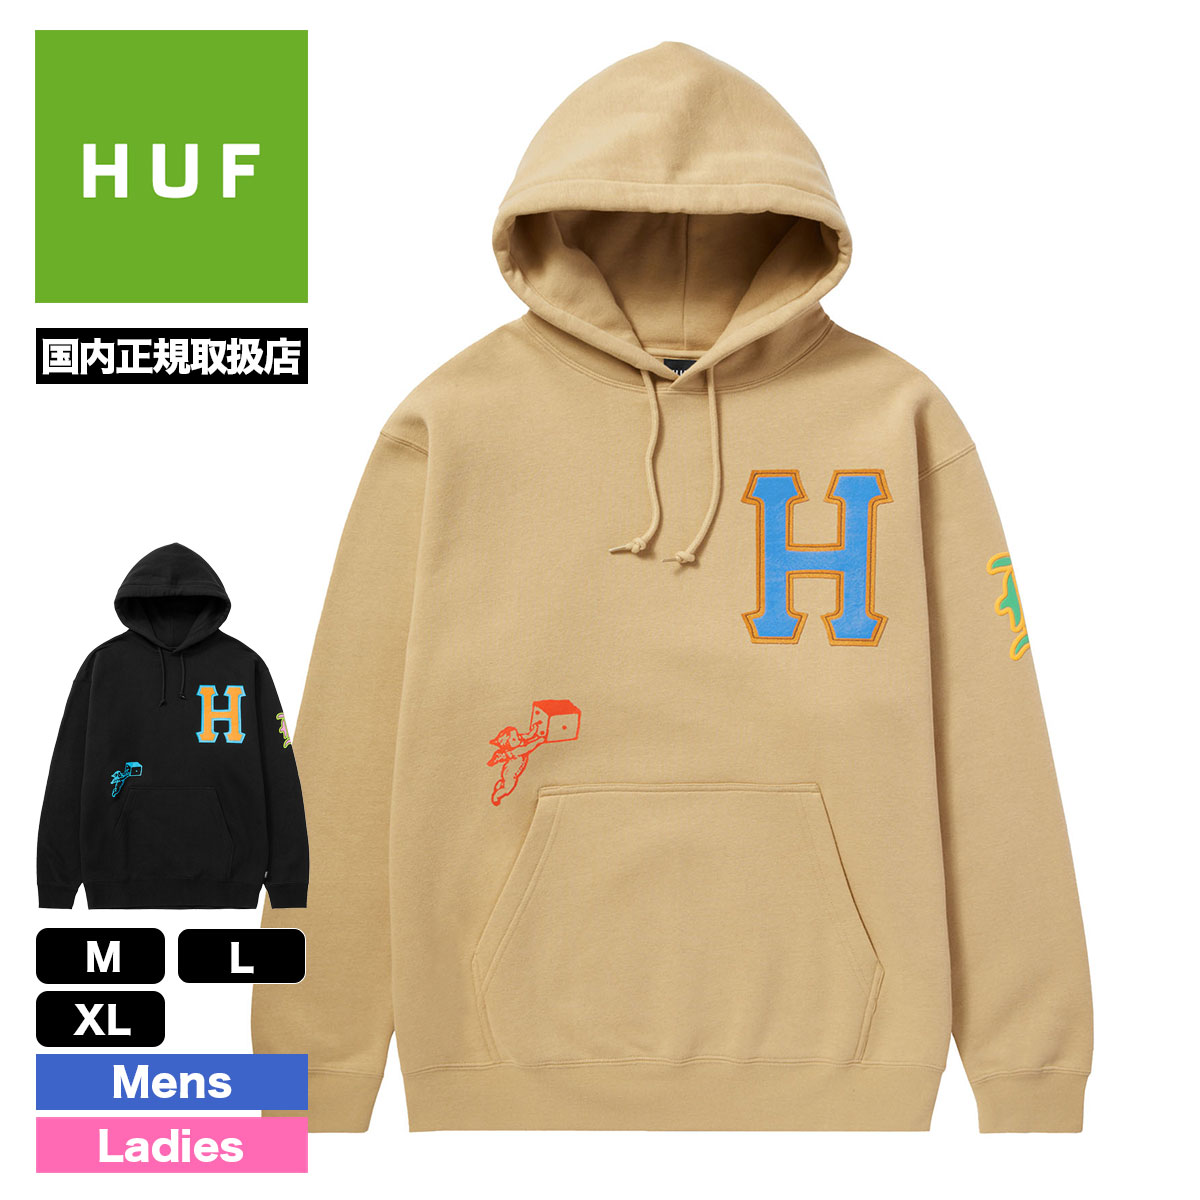 HUF(ハフ) - FLY DIE HOODIE - アップリケ&グラフィックプリント